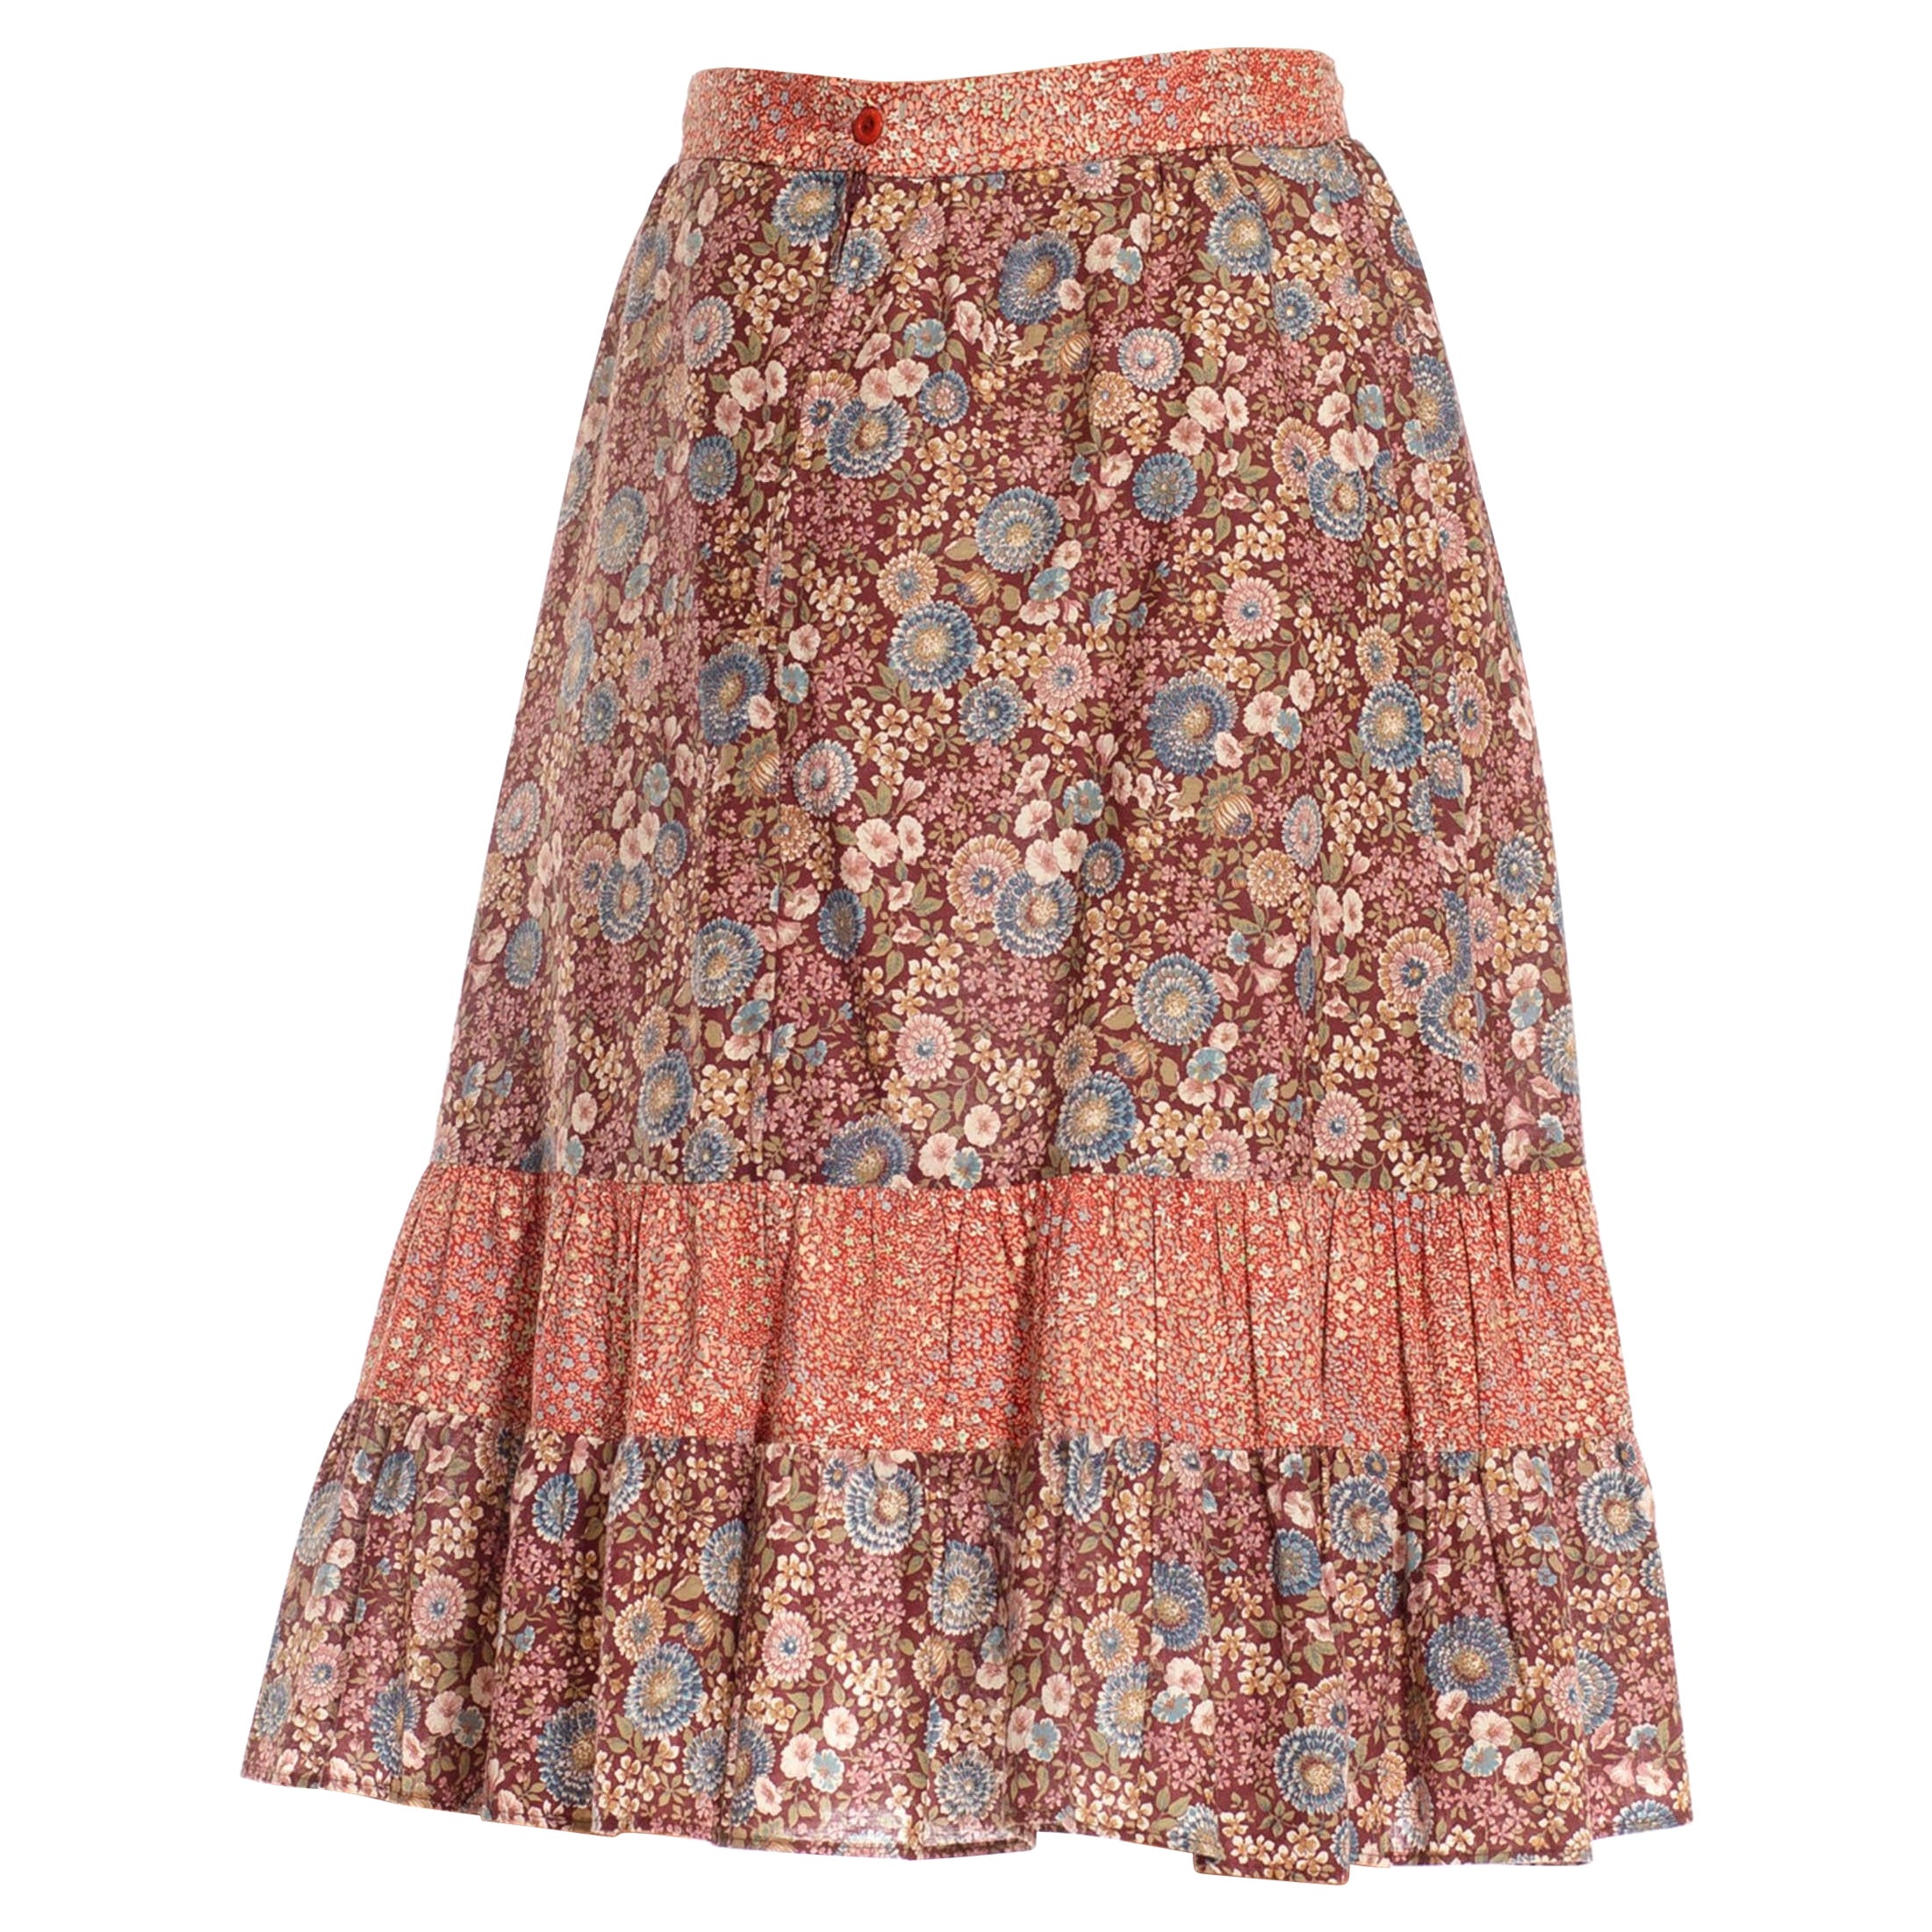 1970S Burgundy & Dusty Pink Cotton Ditsy Floral Print Mix Skirt For Sale